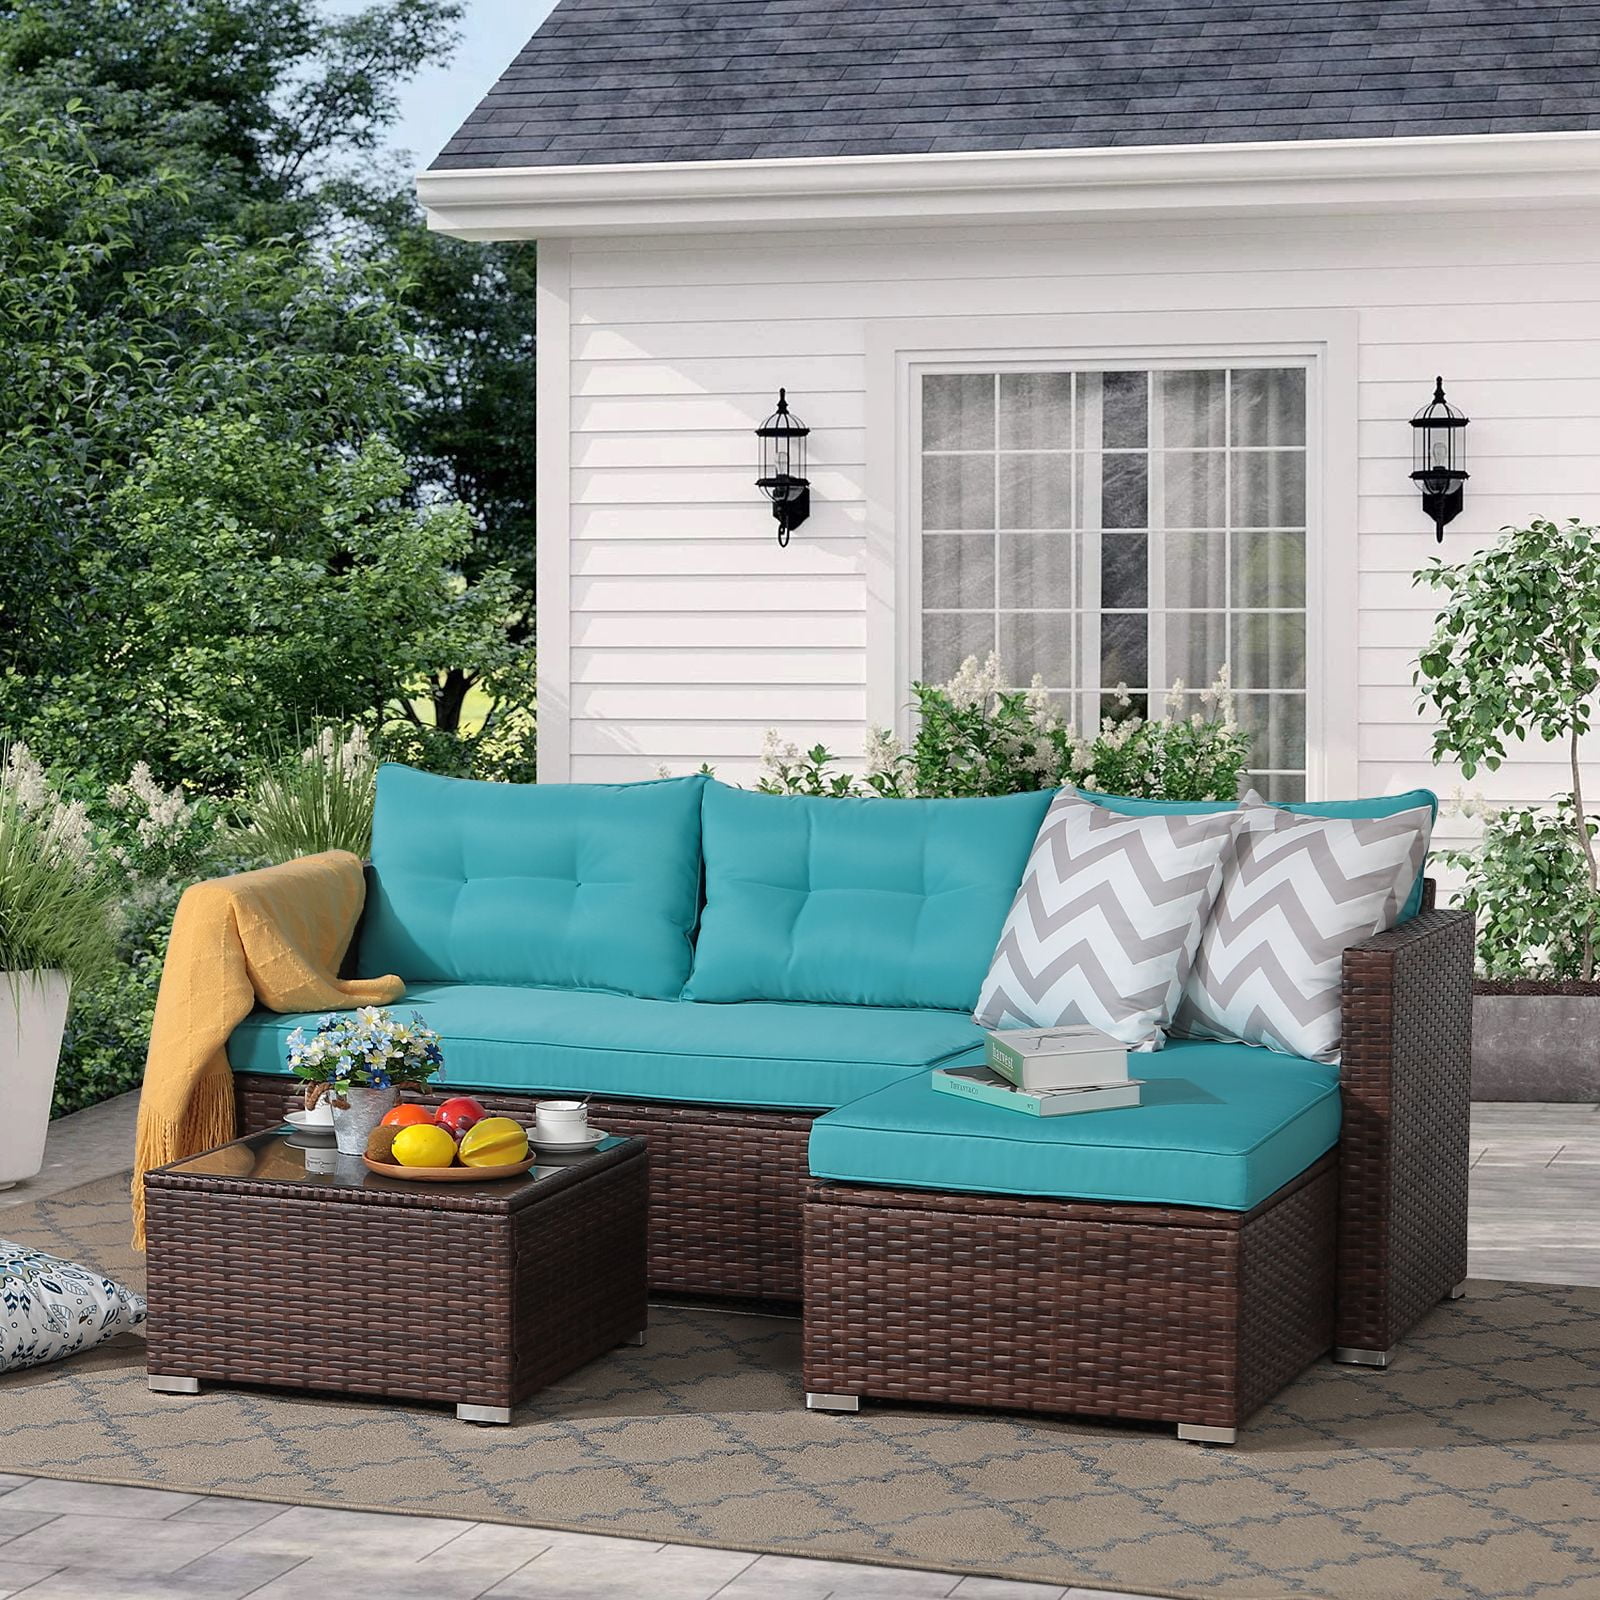 OC Orange-Casual 5-Piece Patio Furniture Set, All-Weather Outdoor Sectional Sofa, with Glass Coffee Table for Deck Balcony Porch, Brown Rattan & Turquoise Cushion - image 1 of 8